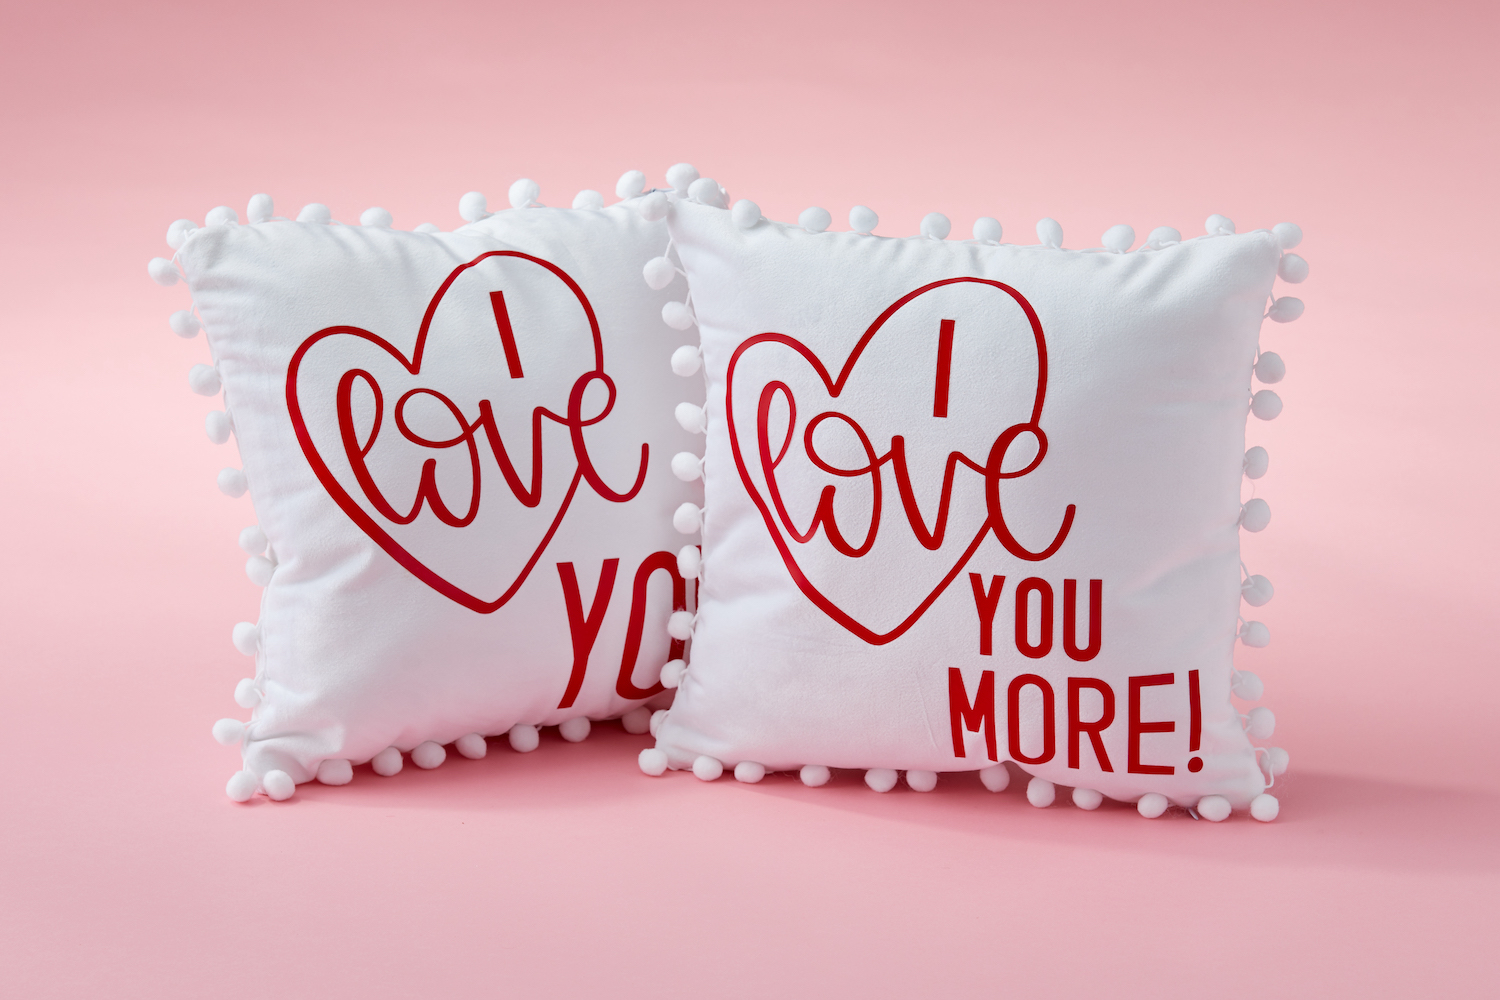 Two throw pillows that say "I Love You More"